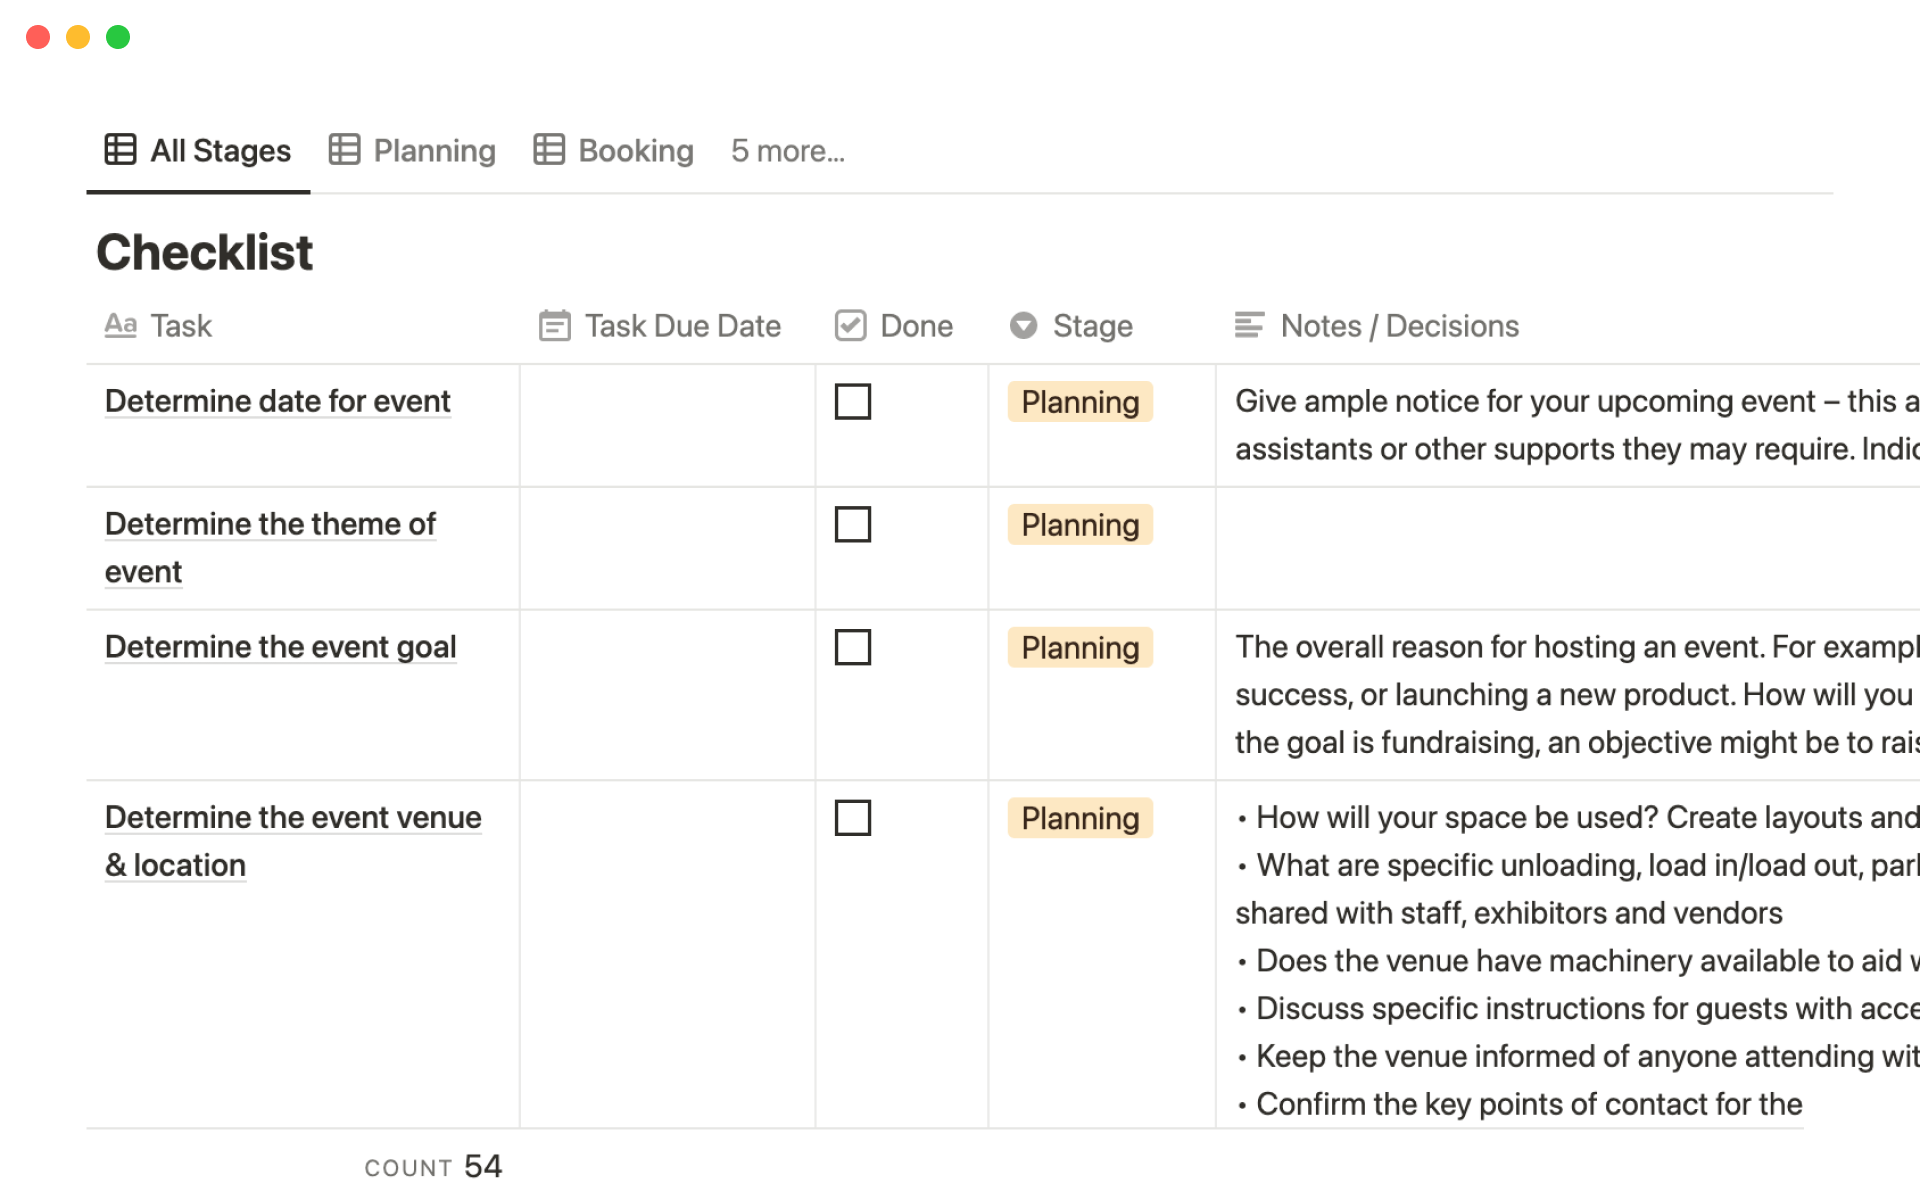 Seamlessly map out your event planning process so you don’t miss a step.